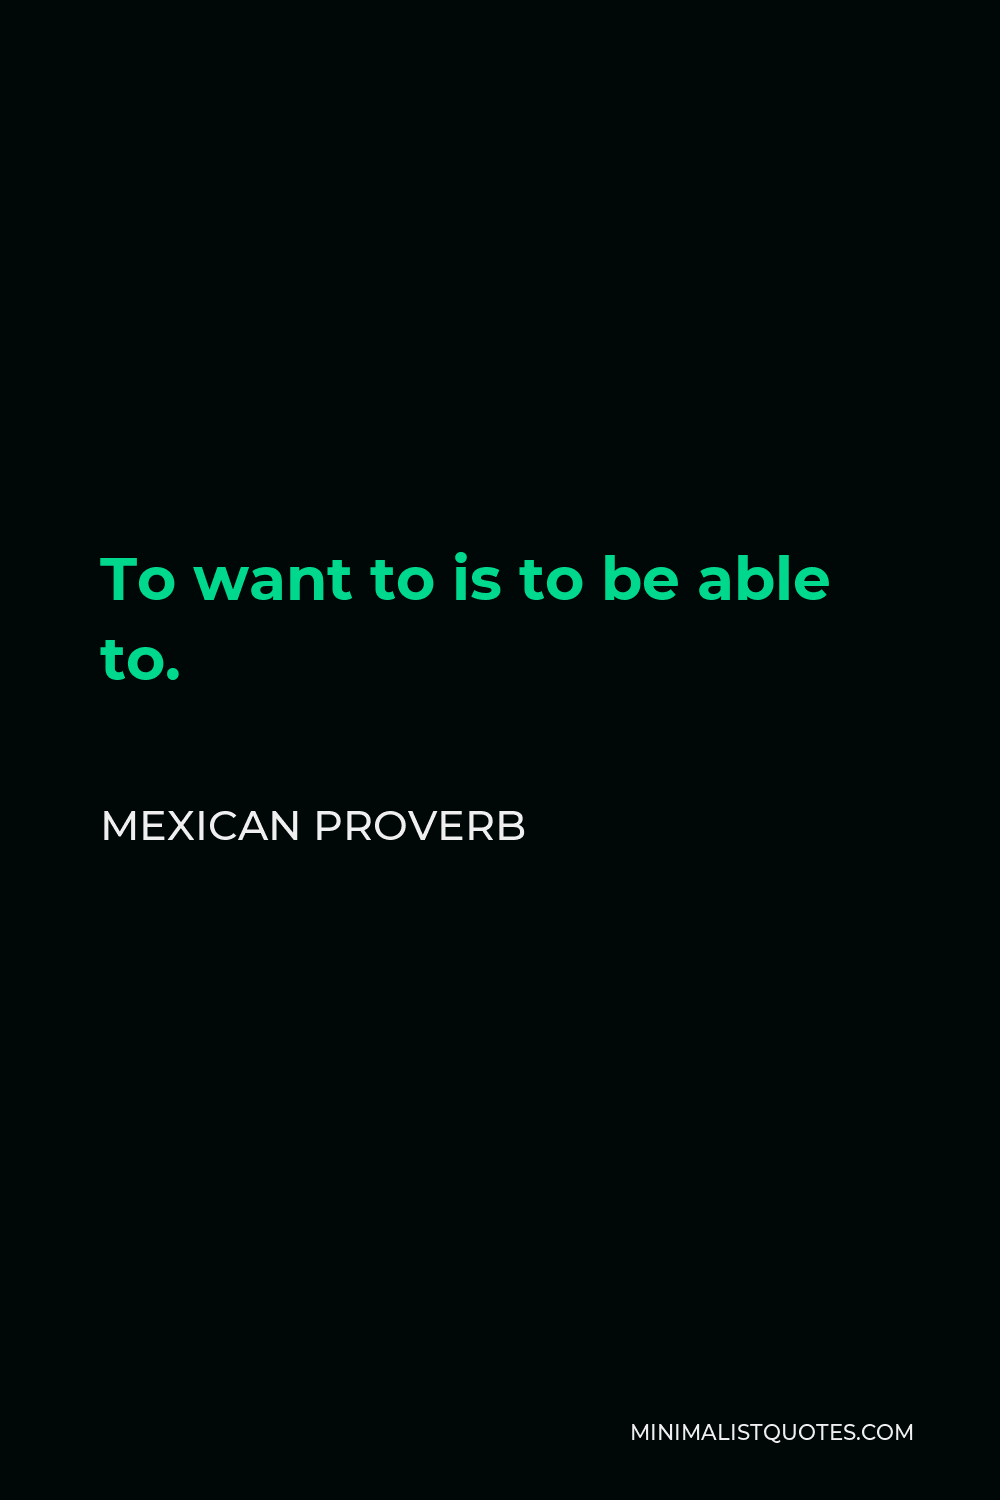 Mexican Proverb Quote - To want to is to be able to.